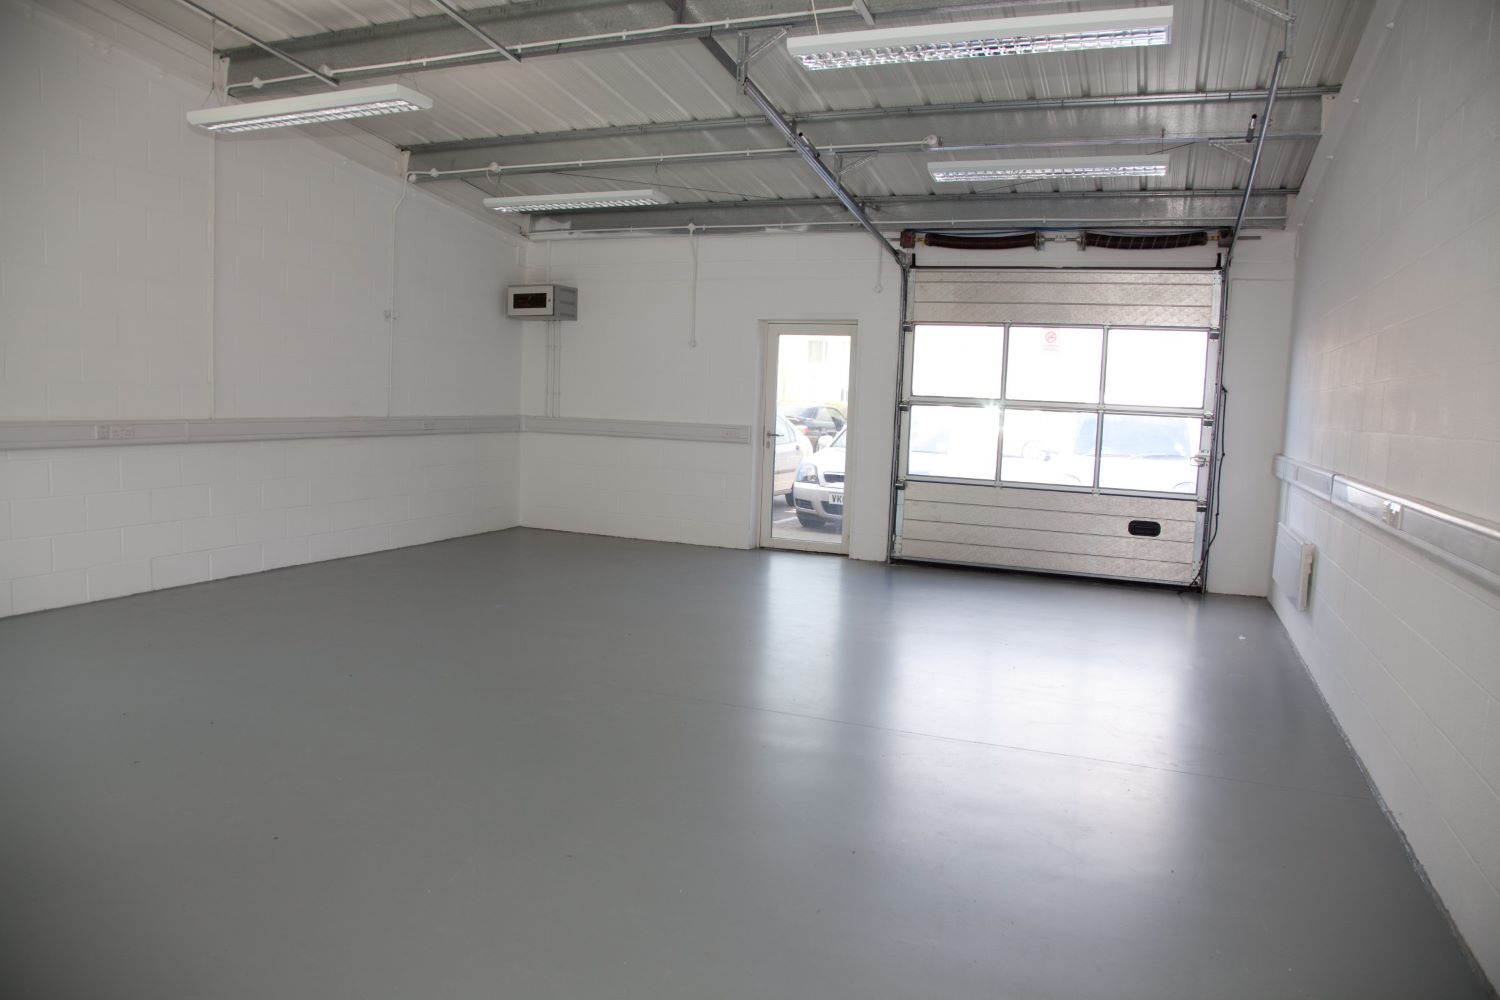 Offices to let in in Gloucester,Gloucestershire